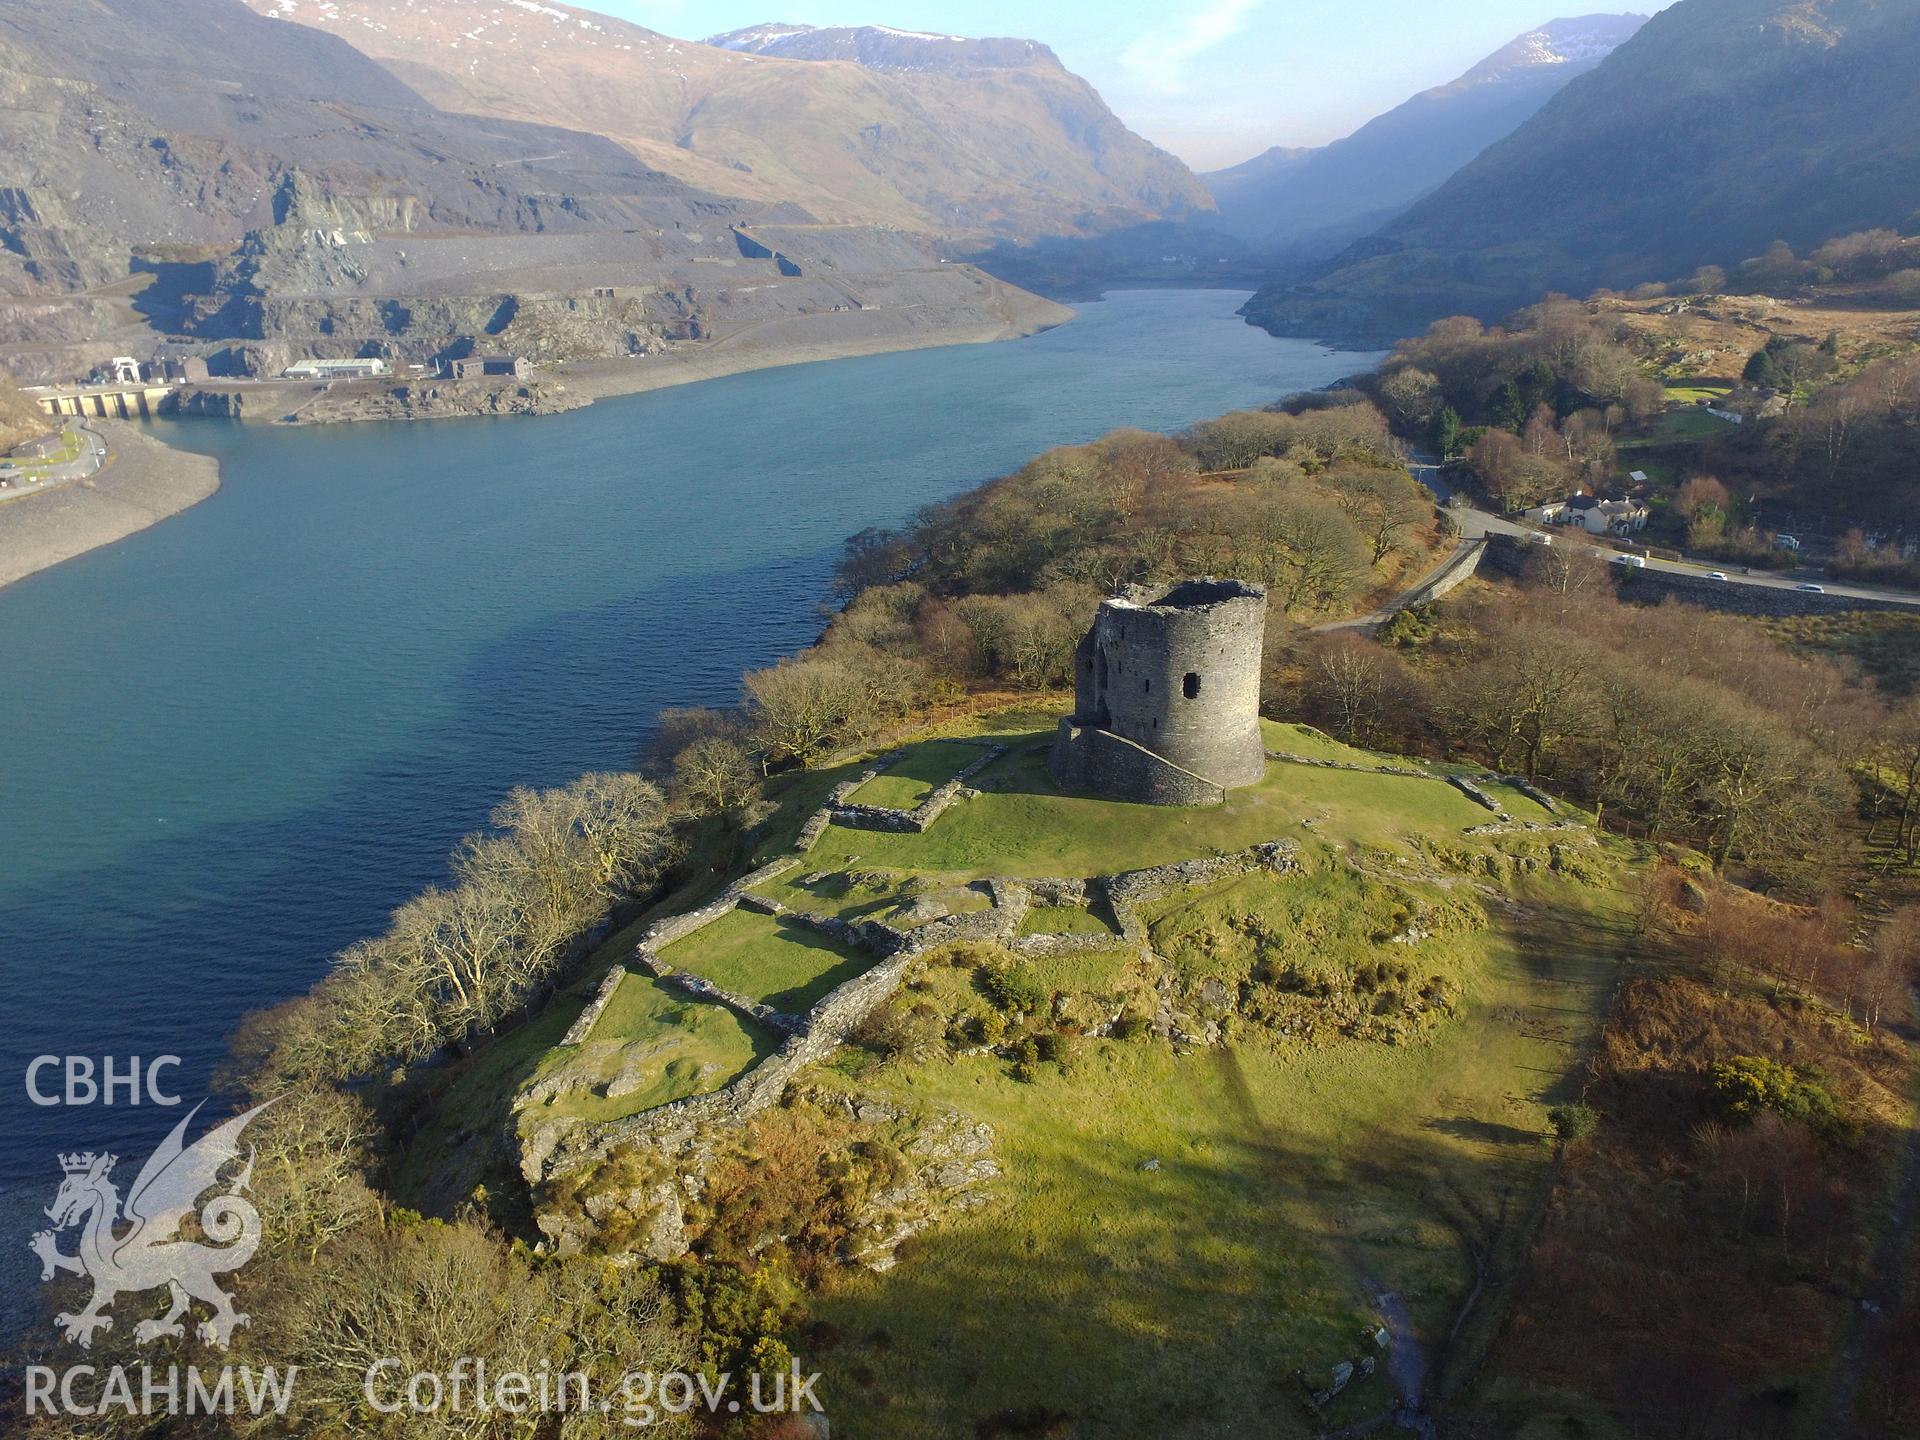 Colour photo showing view of Dolbadarn Castle, taken by Paul R. Davis, March 2018.